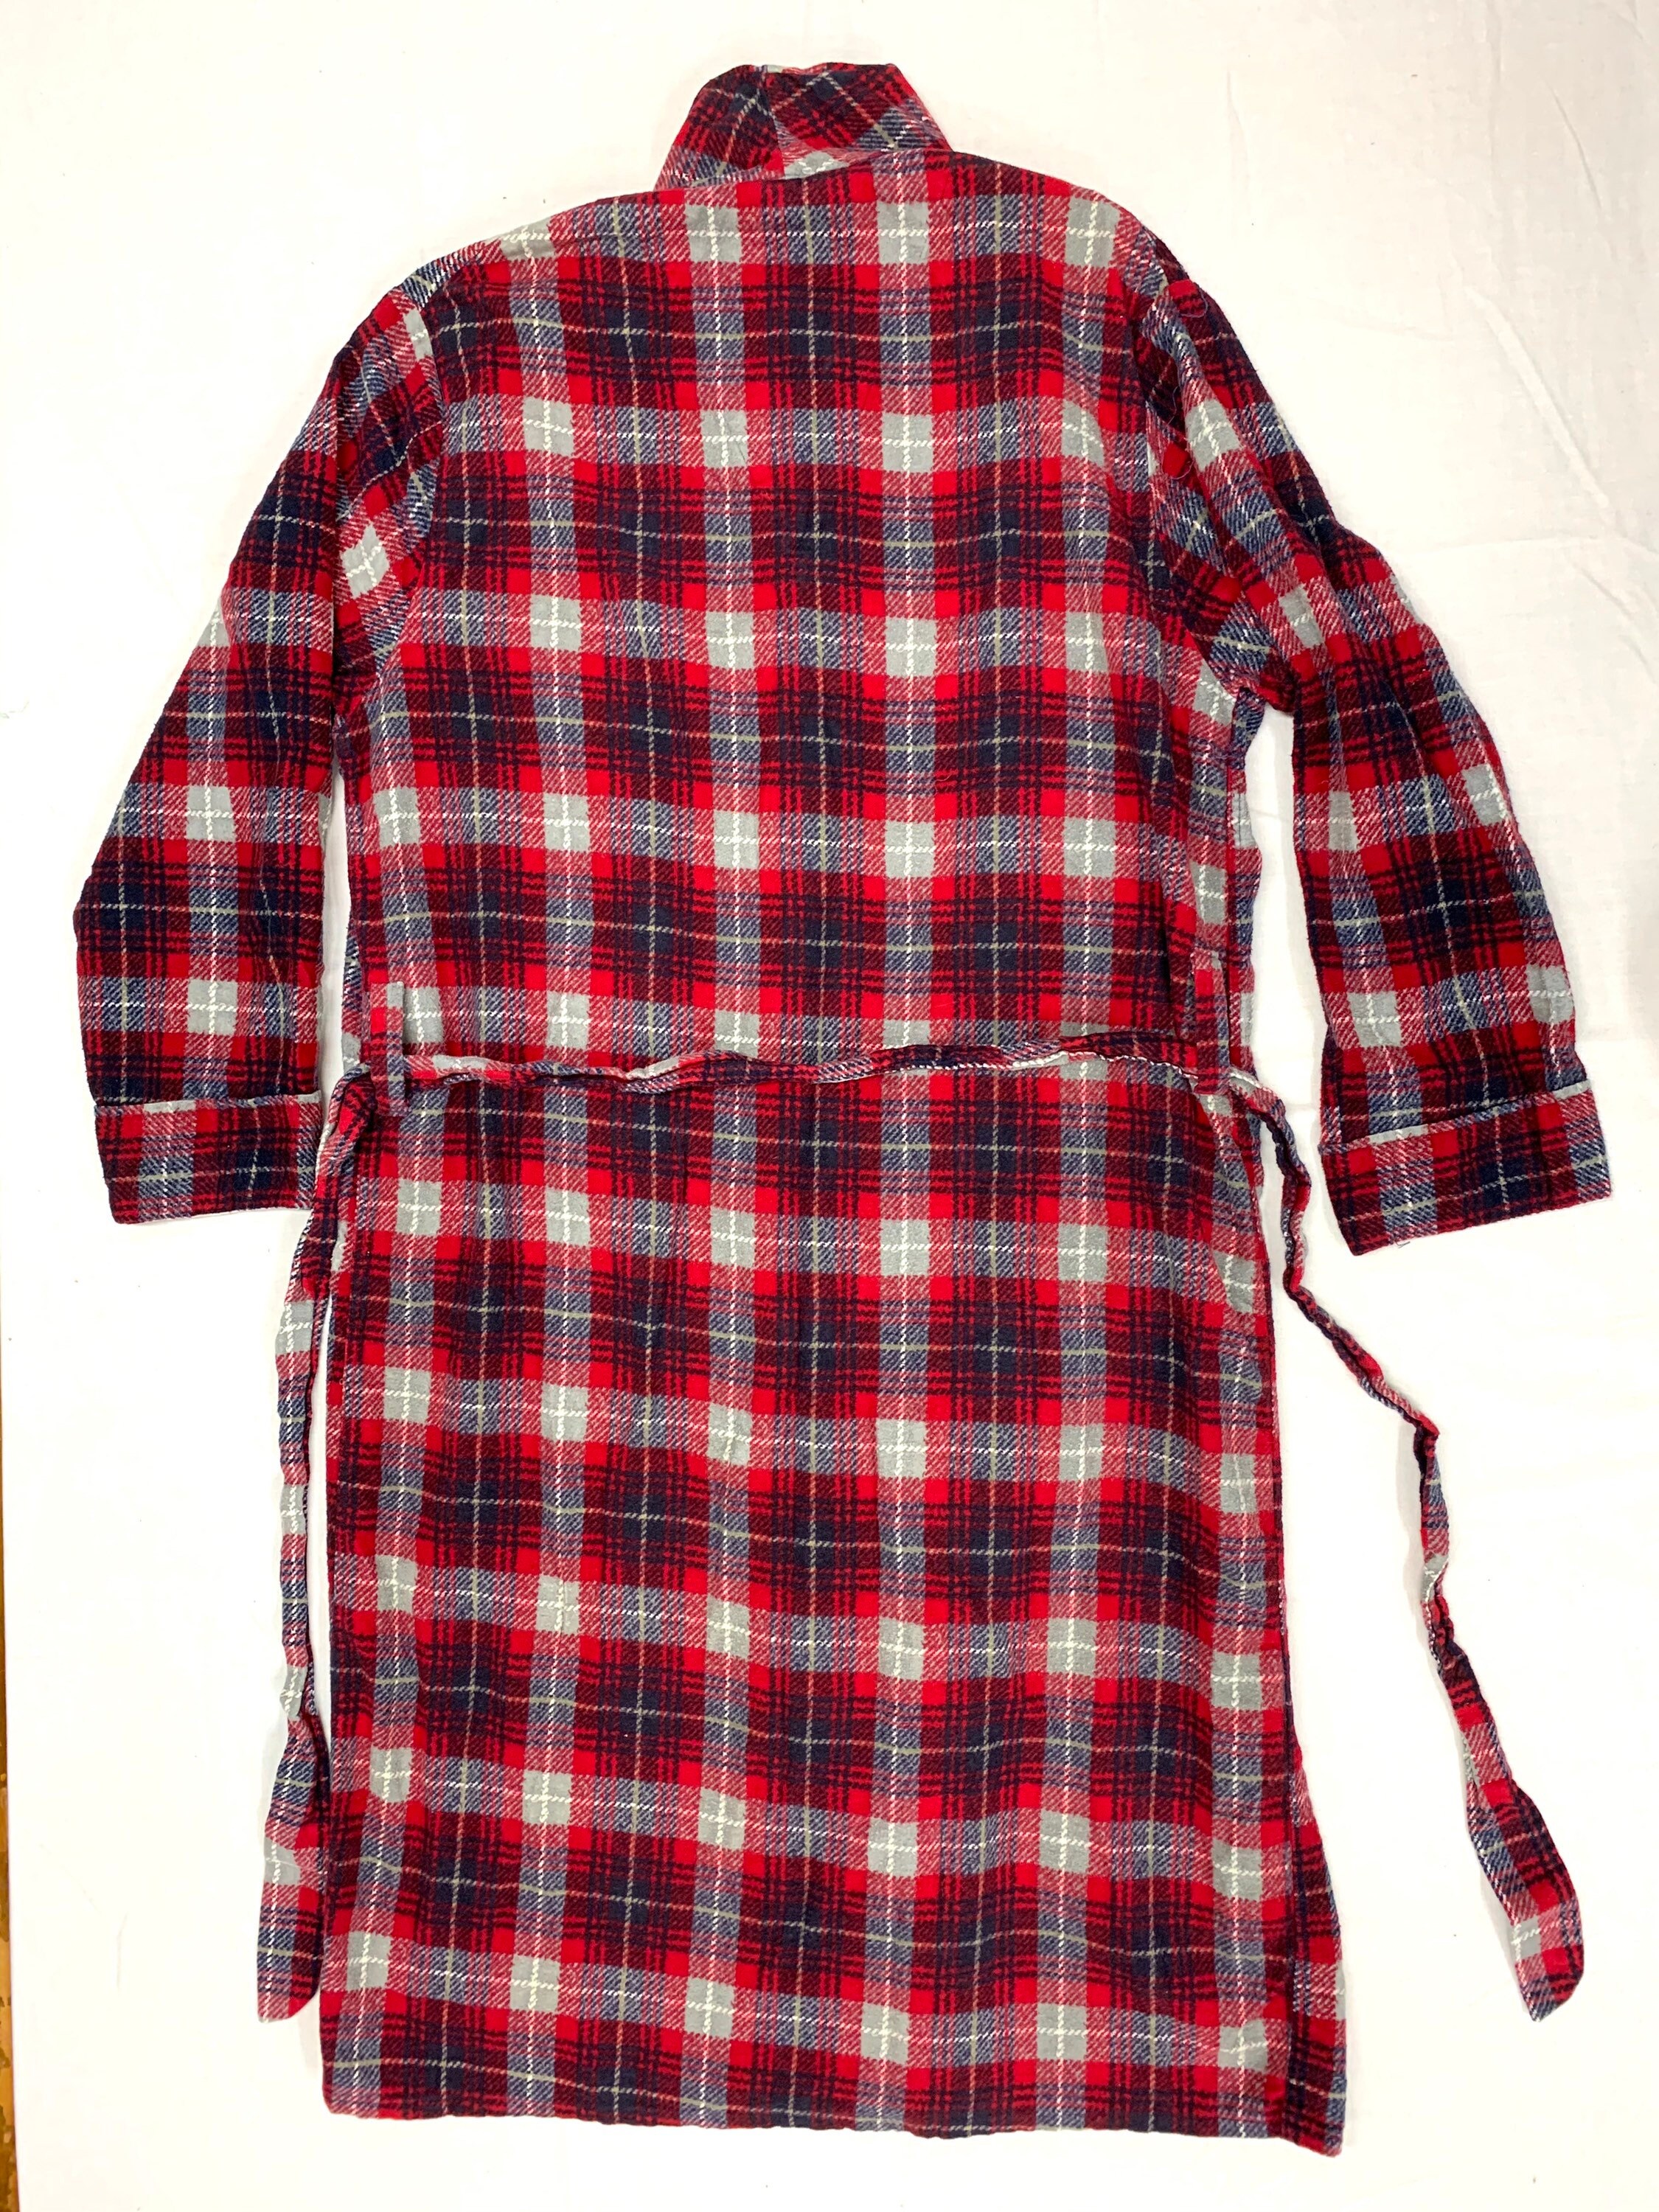 1950s cotton flannel plaid smoking jacket robe size large red gray ...